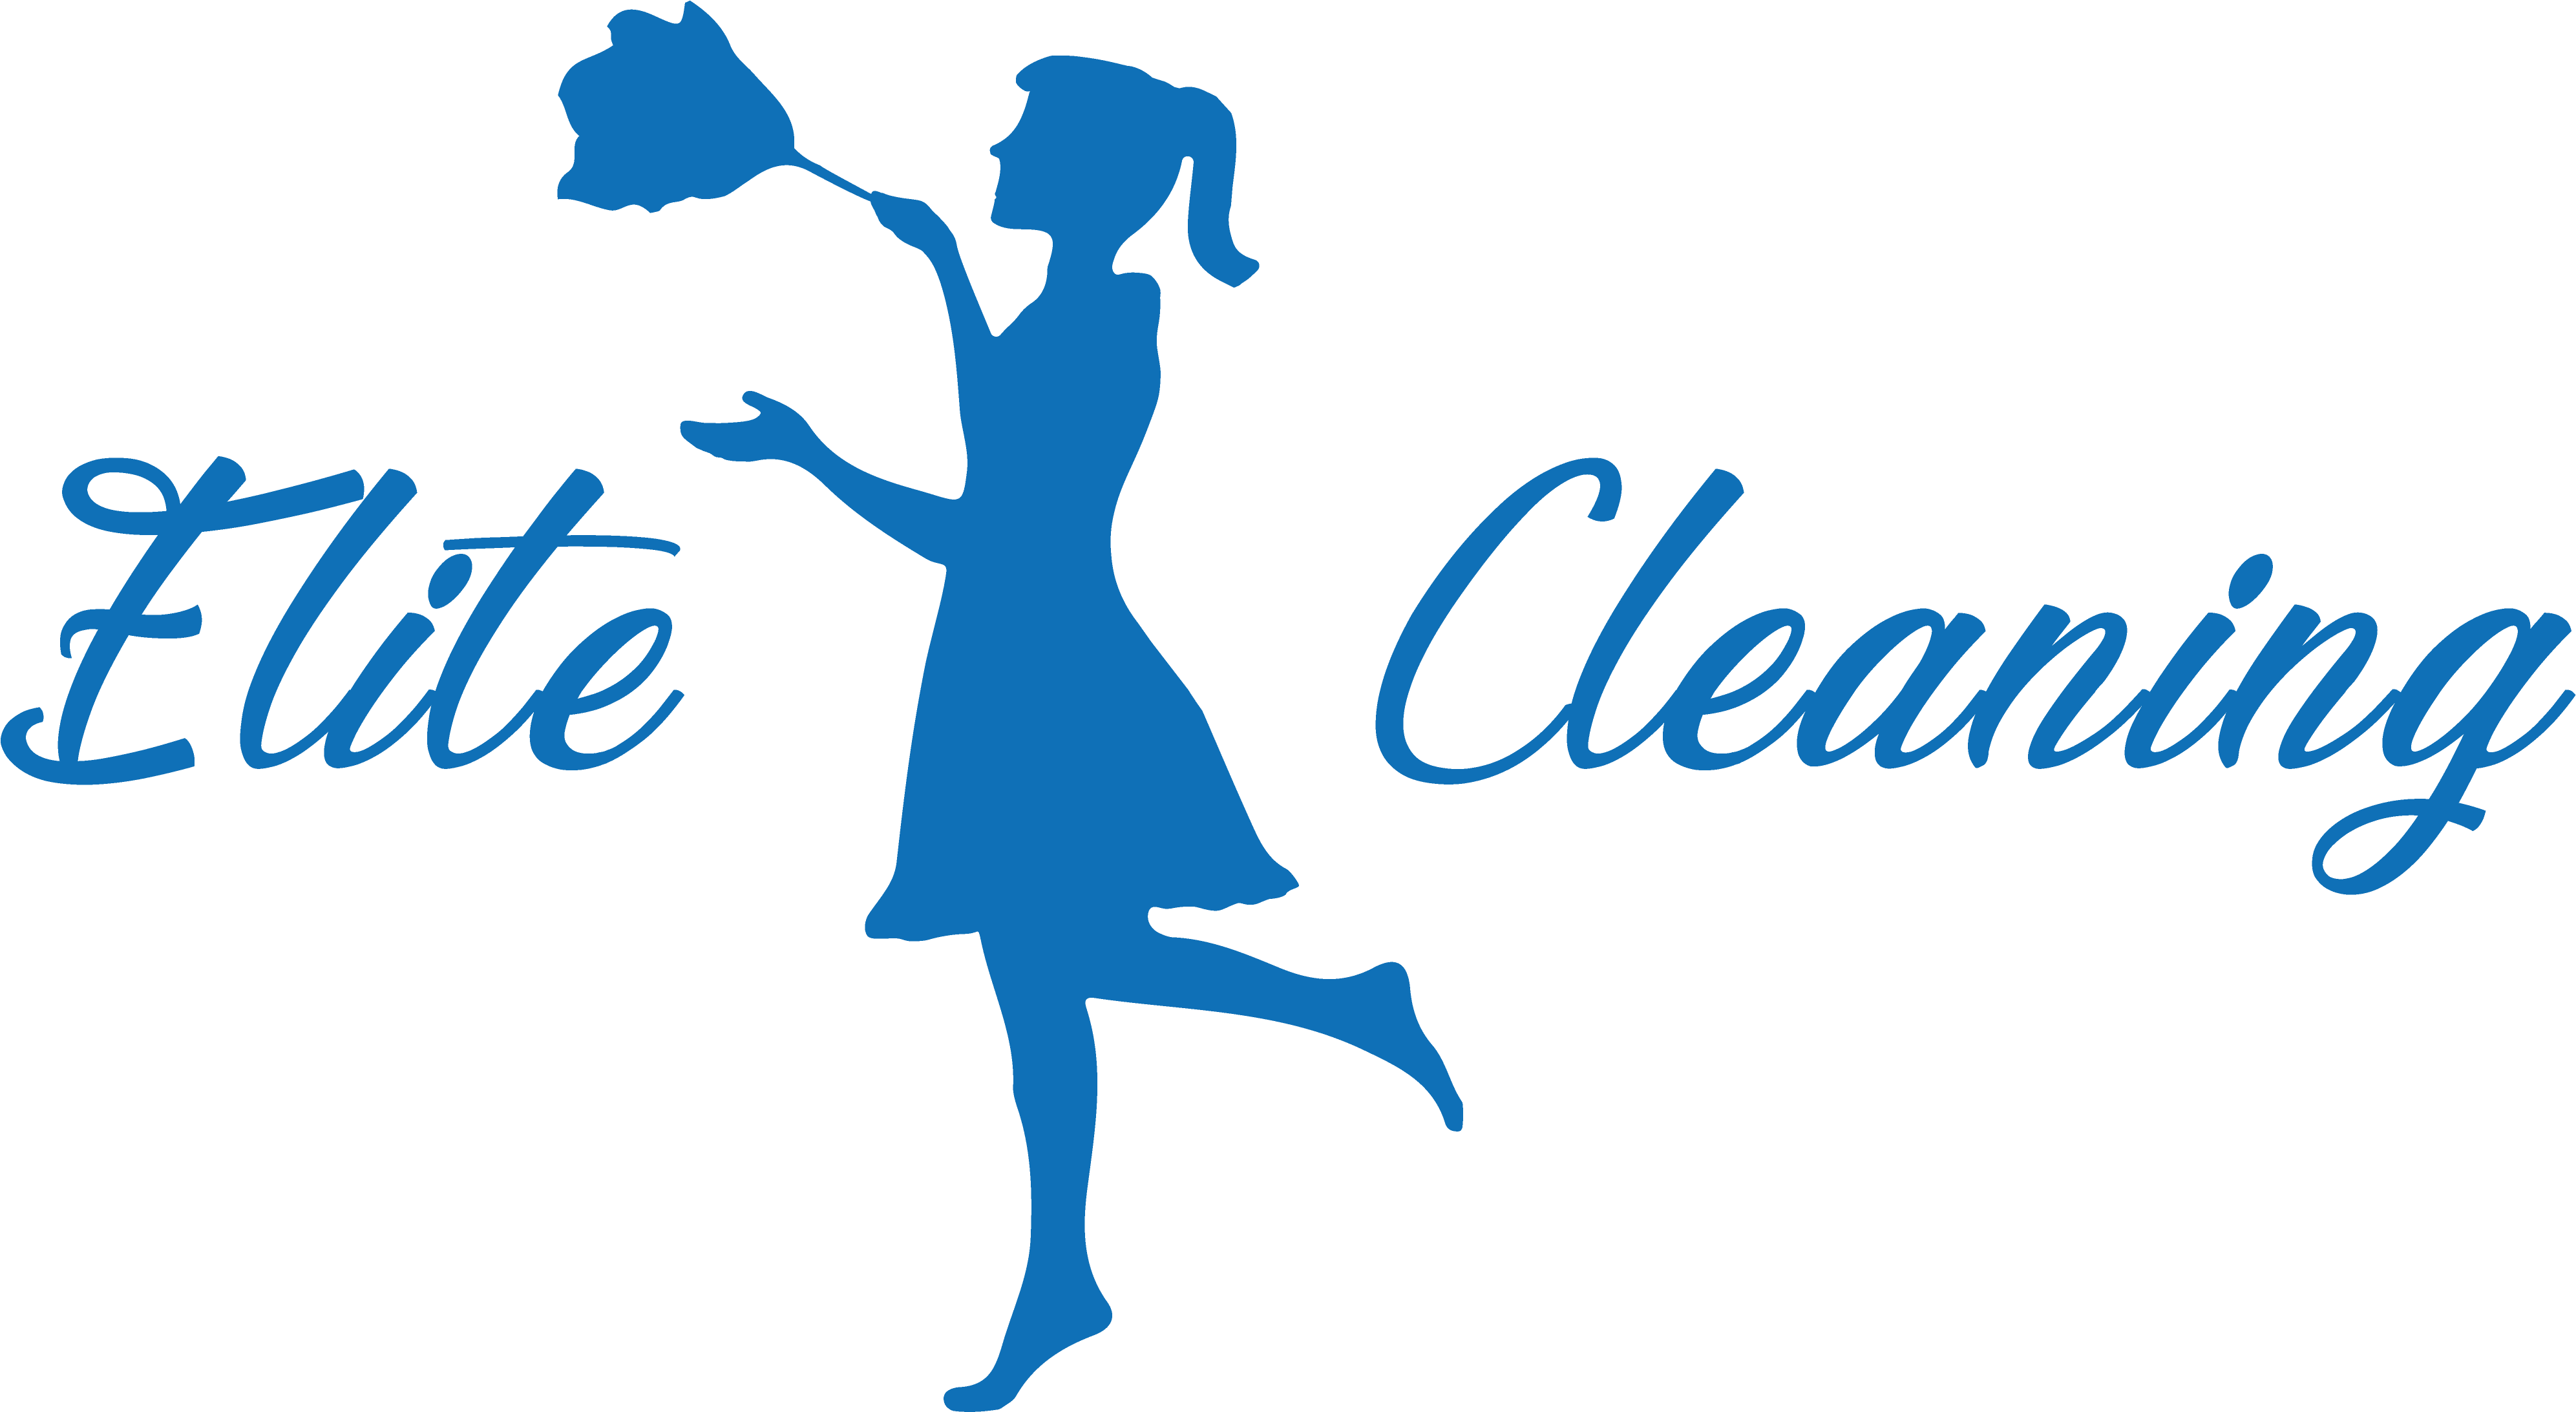 Elite Cleaning - Cleaning Services (4650x2808)